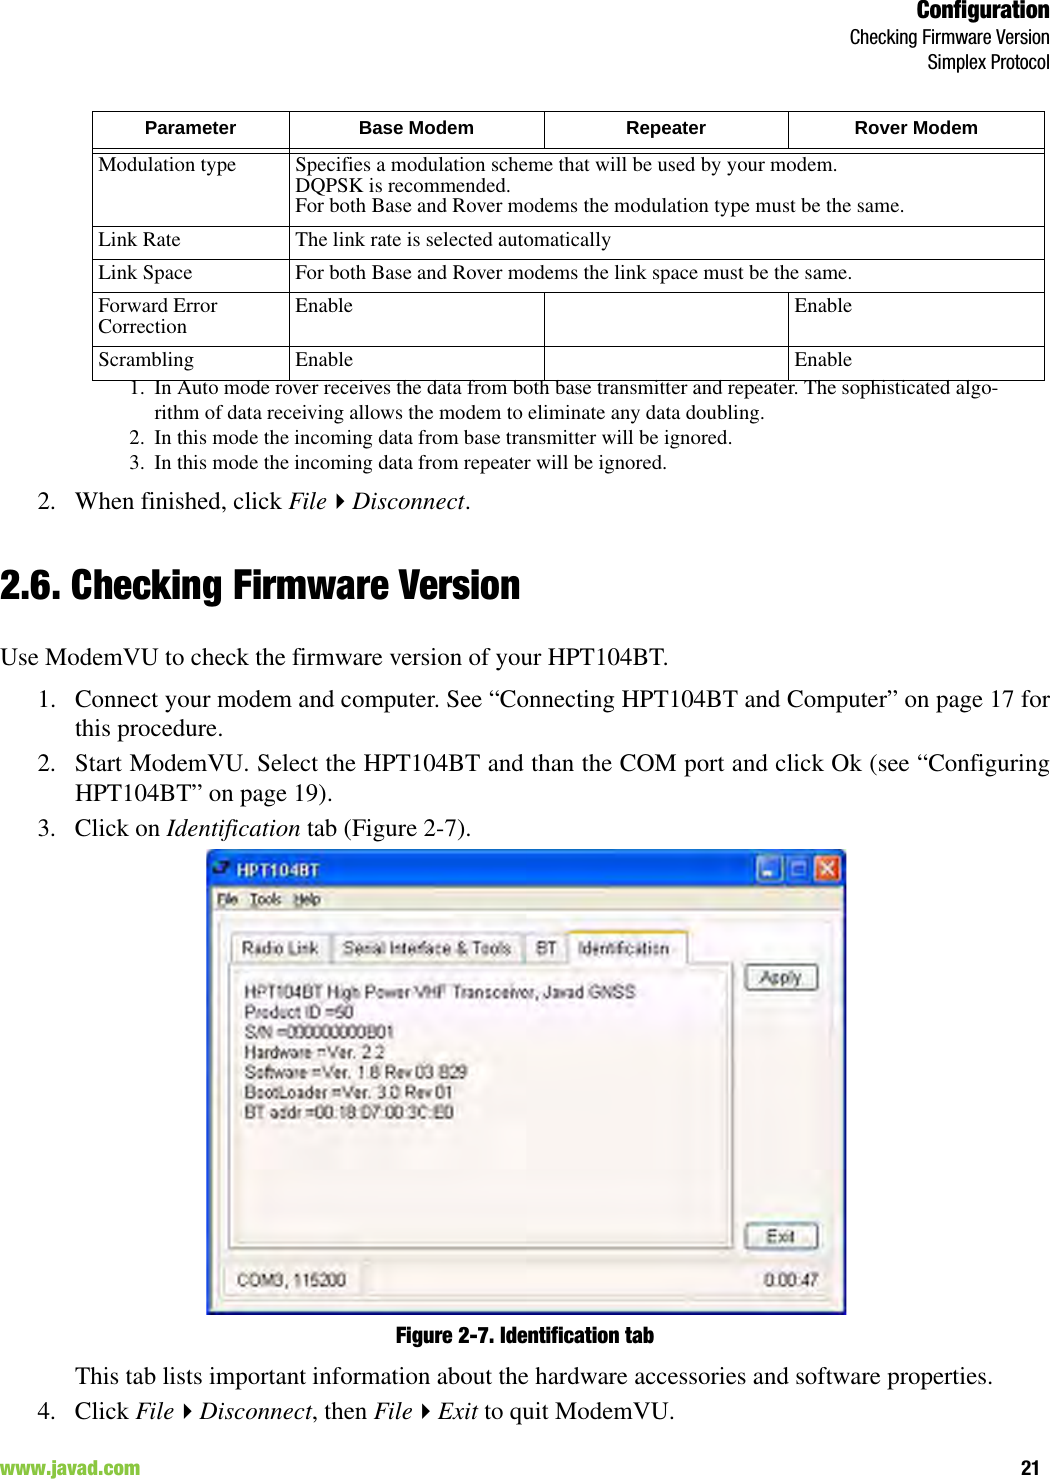 ConfigurationChecking Firmware VersionSimplex Protocol21www.javad.com                                                                                                                                                        2. When finished, click FileDisconnect.2.6. Checking Firmware VersionUse ModemVU to check the firmware version of your HPT104BT.1. Connect your modem and computer. See “Connecting HPT104BT and Computer” on page 17 forthis procedure.2. Start ModemVU. Select the HPT104BT and than the COM port and click Ok (see “ConfiguringHPT104BT” on page 19).3. Click on Identification tab (Figure 2-7).Figure 2-7. Identification tabThis tab lists important information about the hardware accessories and software properties. 4. Click FileDisconnect, then FileExit to quit ModemVU.Modulation type Specifies a modulation scheme that will be used by your modem. DQPSK is recommended.For both Base and Rover modems the modulation type must be the same.Link Rate The link rate is selected automaticallyLink Space For both Base and Rover modems the link space must be the same.Forward Error Correction Enable EnableScrambling Enable Enable1. In Auto mode rover receives the data from both base transmitter and repeater. The sophisticated algo-rithm of data receiving allows the modem to eliminate any data doubling.2. In this mode the incoming data from base transmitter will be ignored.3. In this mode the incoming data from repeater will be ignored.Parameter Base Modem Repeater Rover Modem